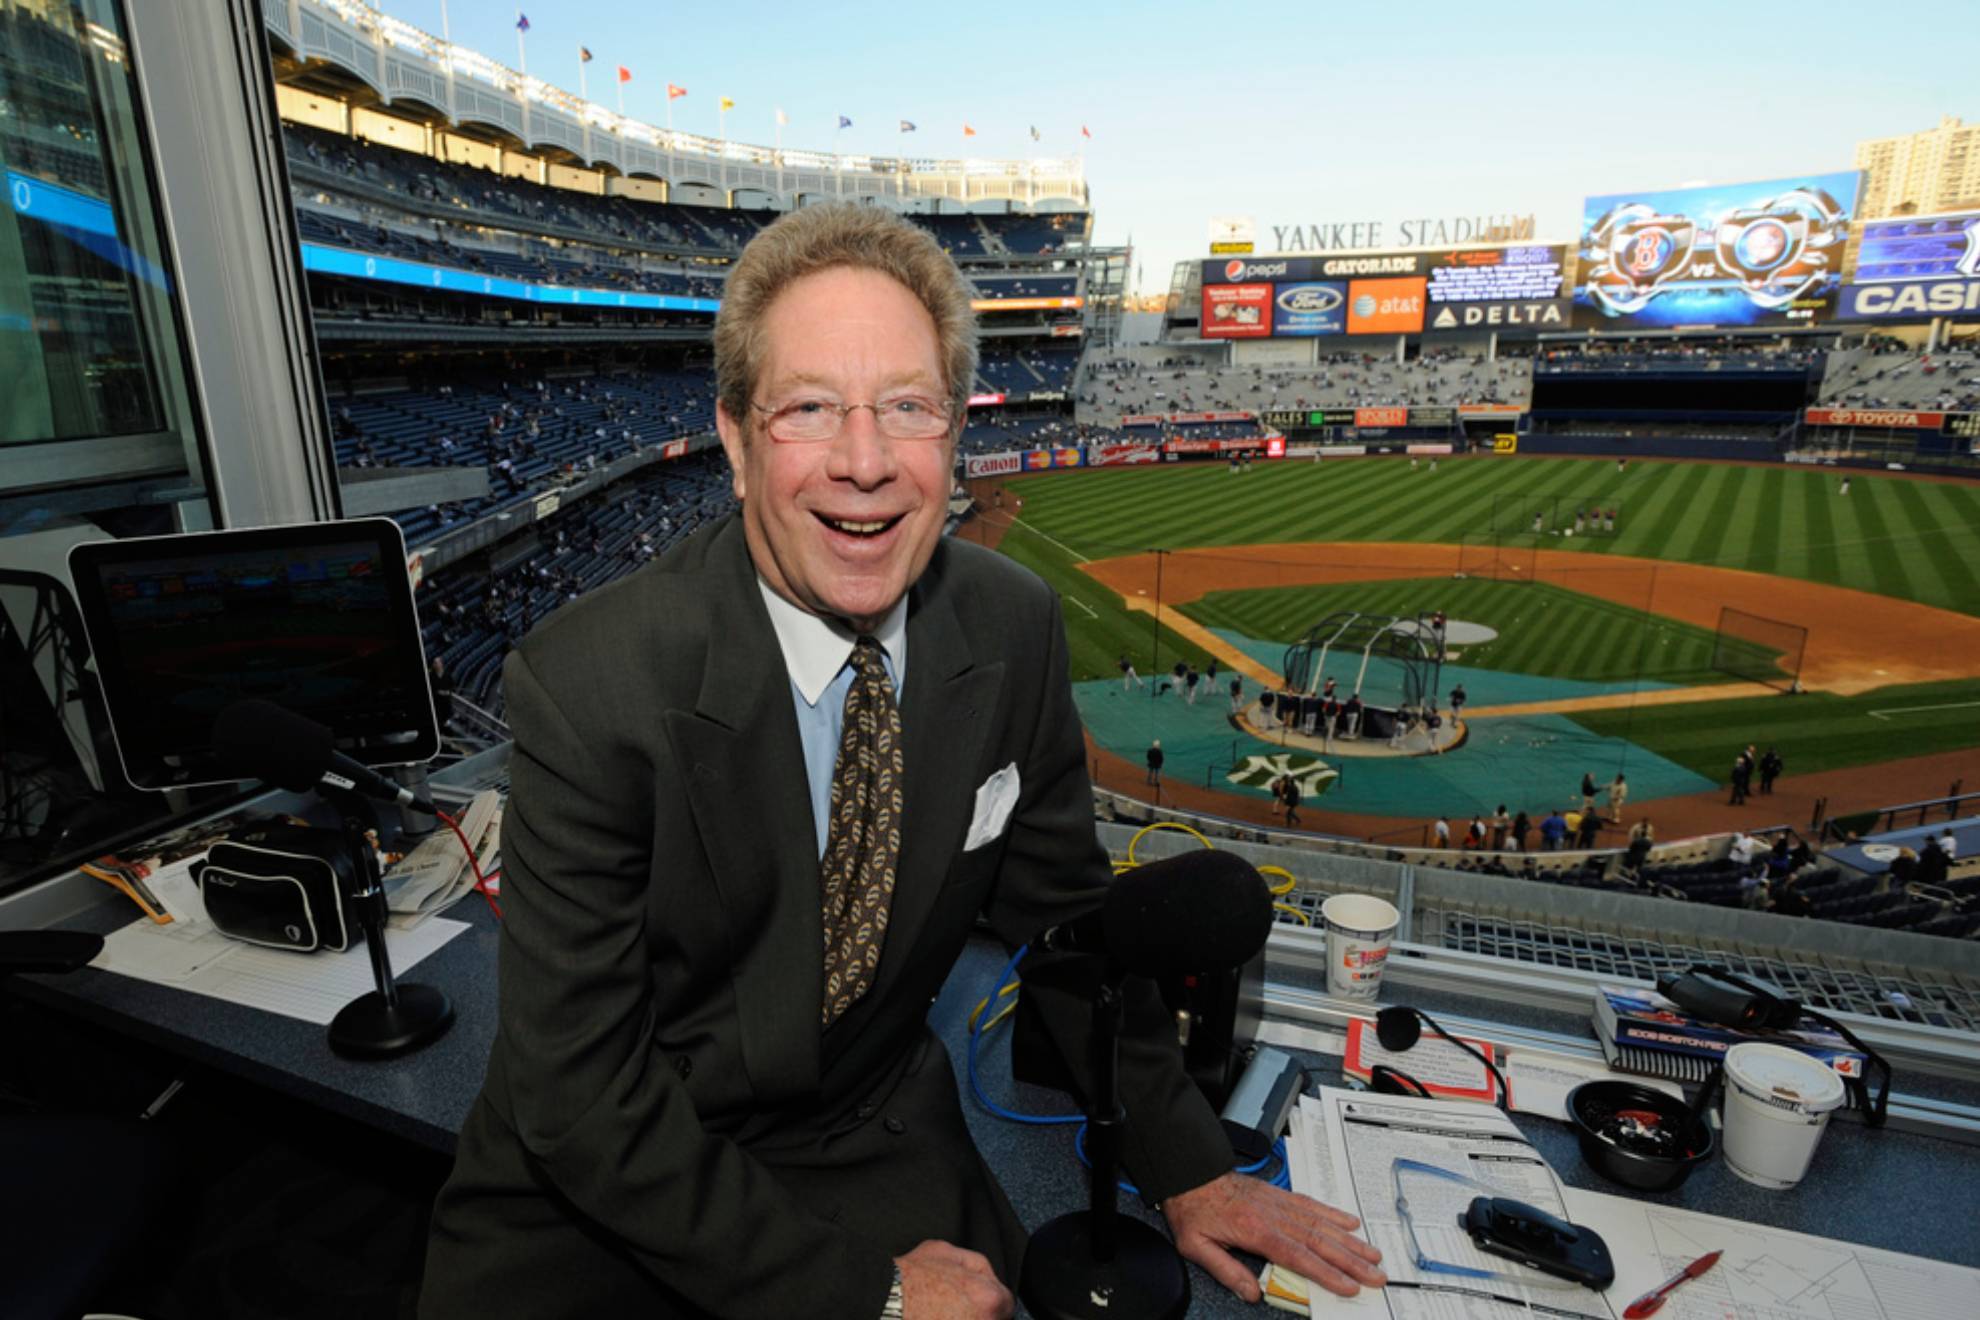 Yanks broadcaster John Sterling hit by foul ball, continues commentary